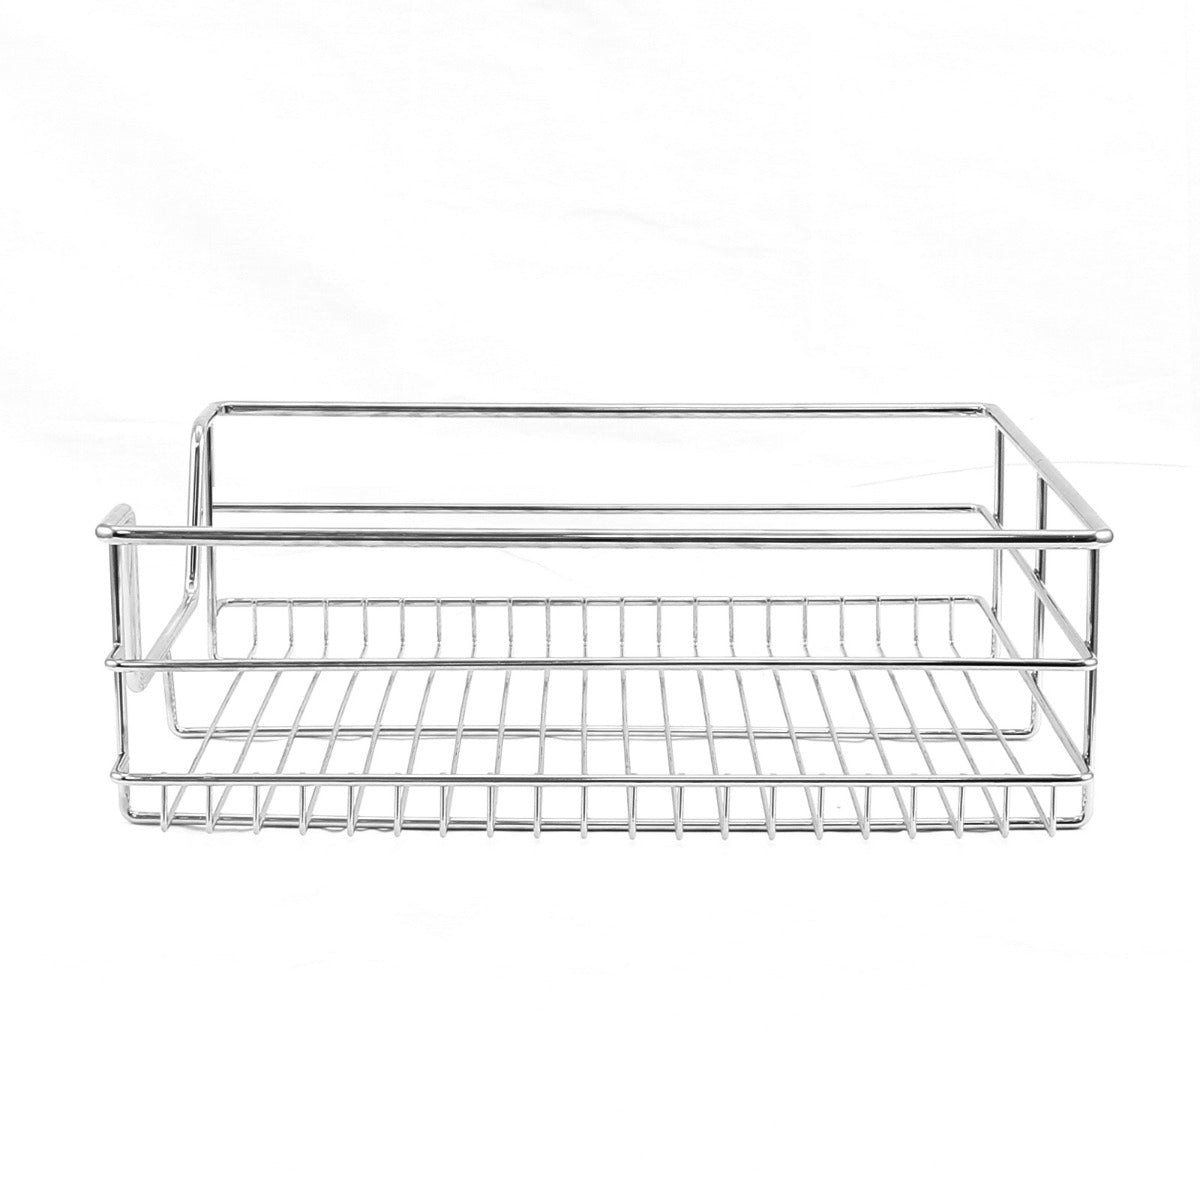 6 x KuKoo Kitchen Pull Out Storage Baskets – 400mm Wide Cabinet